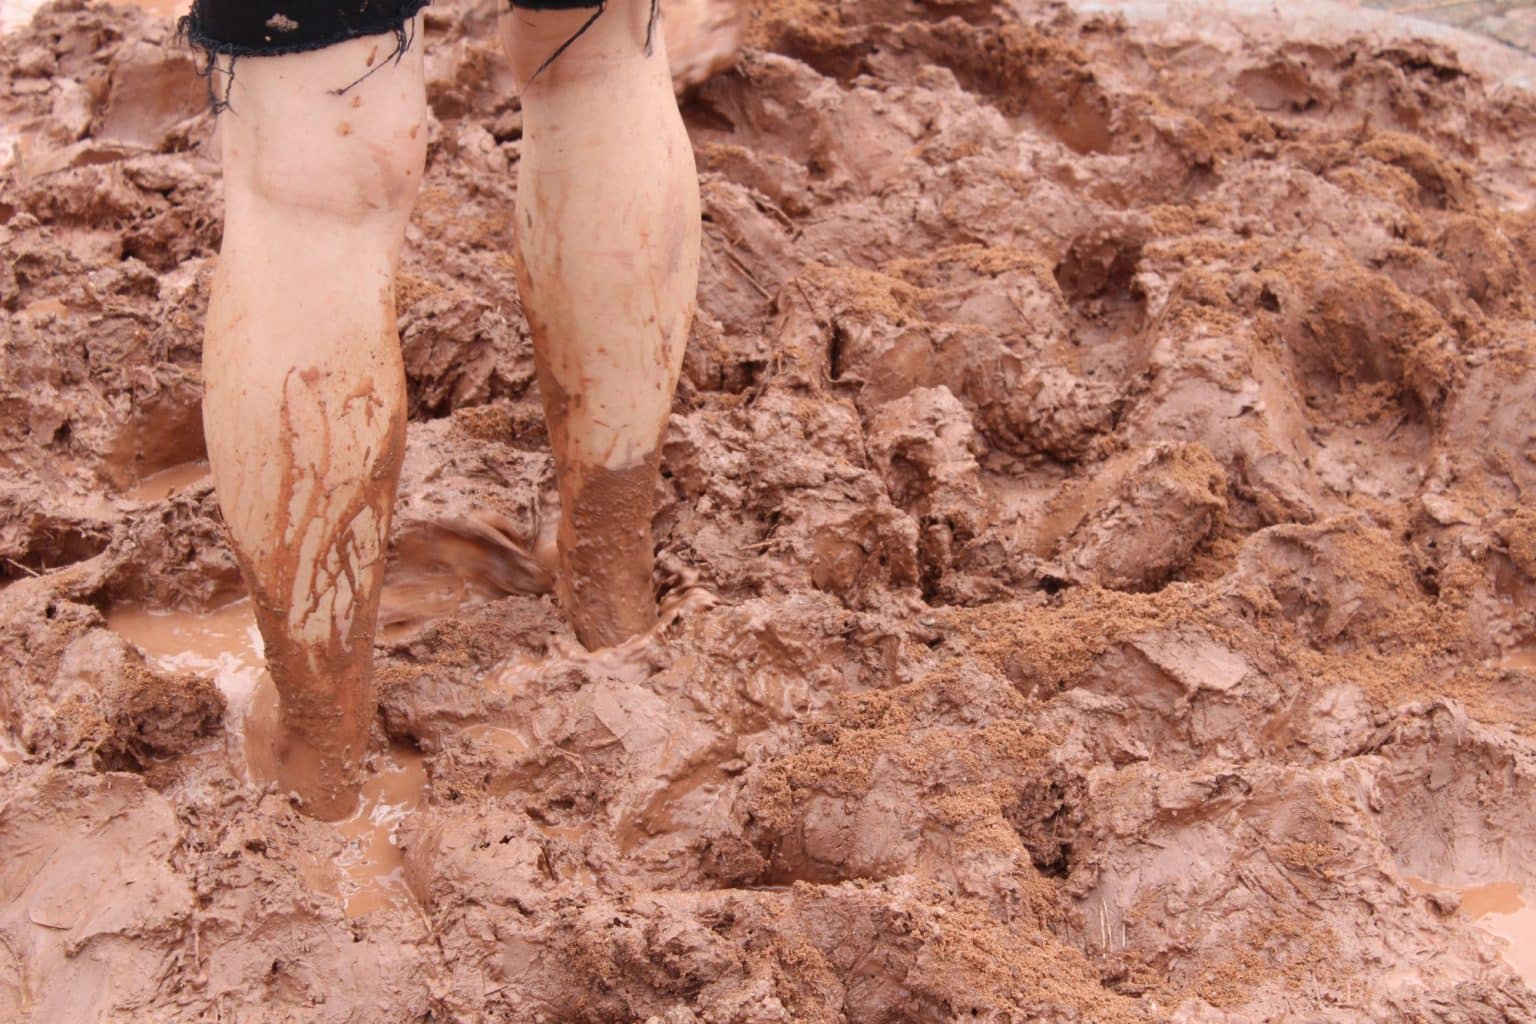 Muddy legs standing in clay